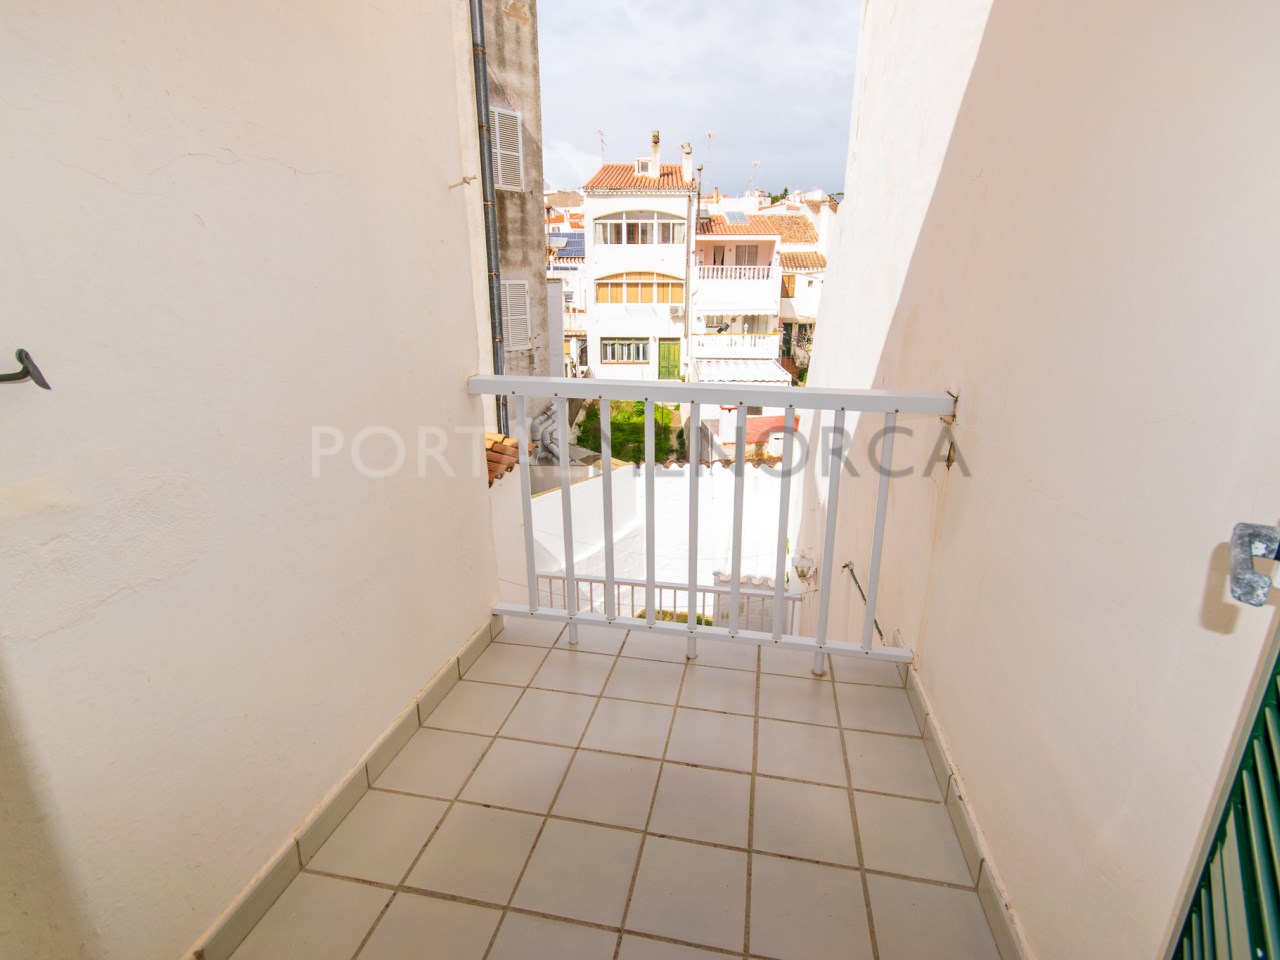 Terrace whole house with orchard for sale in Alaior